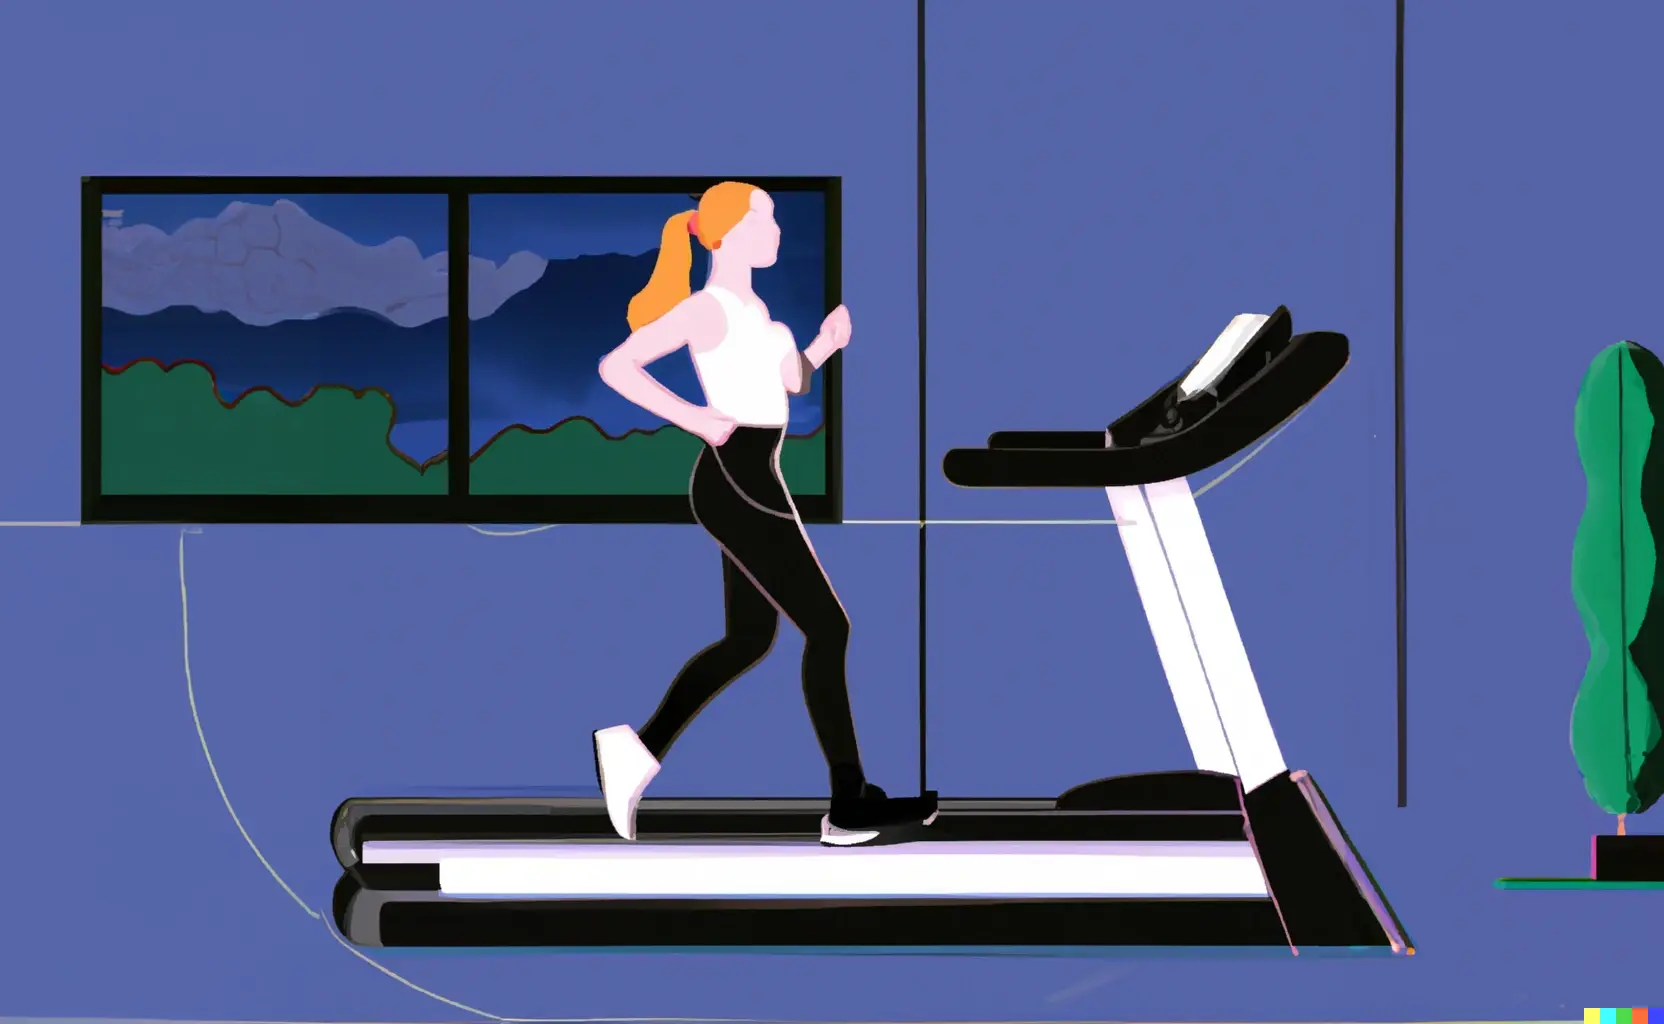 A person running in an indoor treadmill